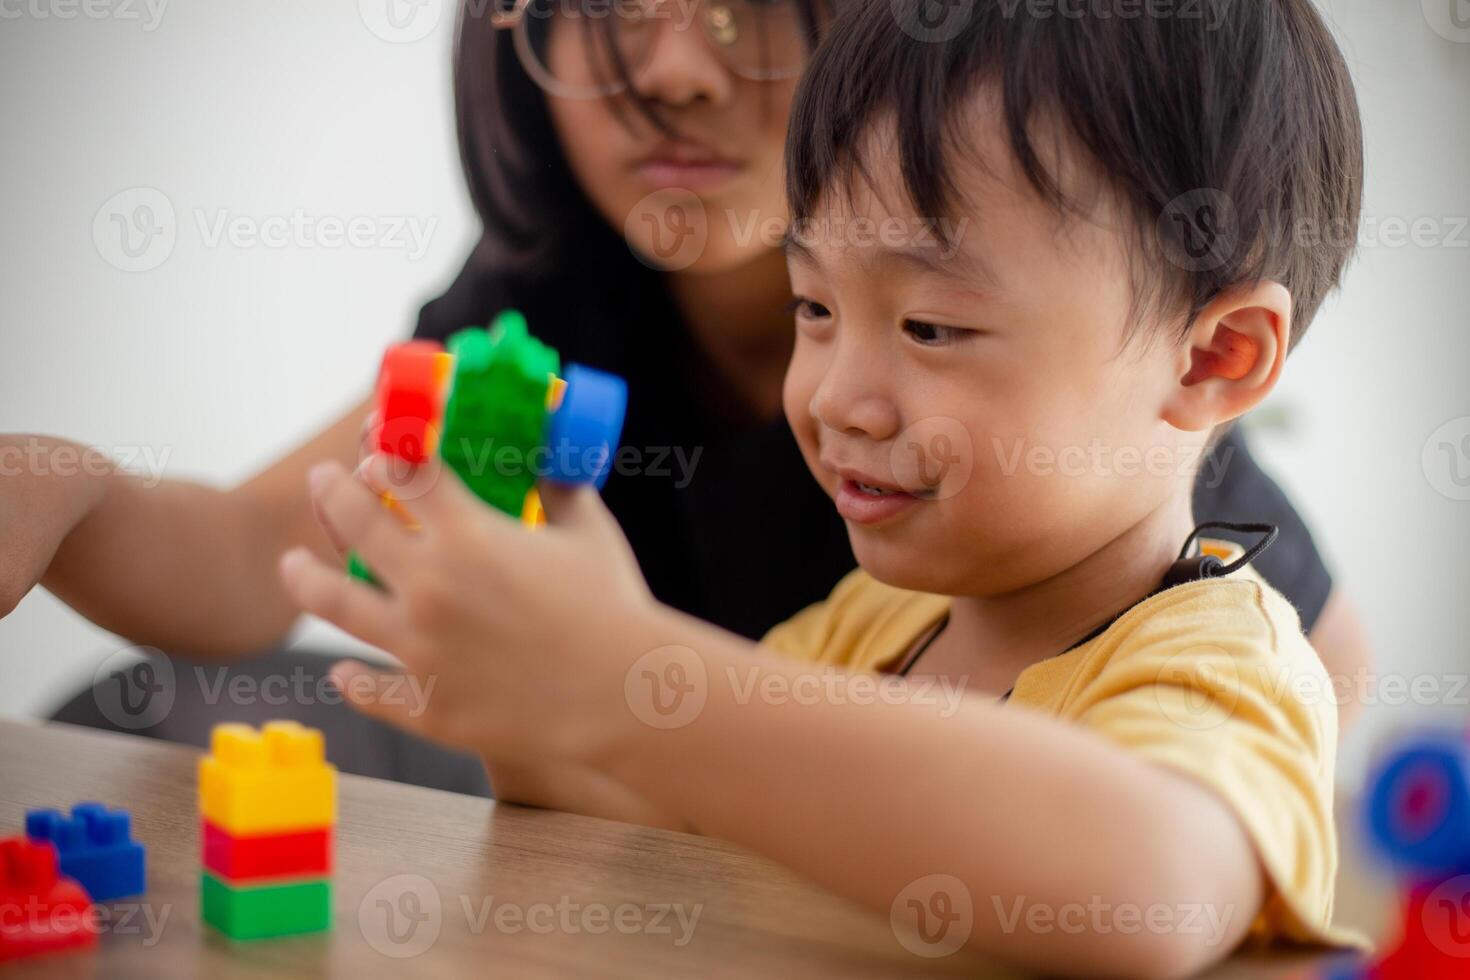 Asian cute brother and sister play with a toy block designer on the table in the living room at home. Concept of siblings bonding, friendship, and learning through play activity for kid development. photo